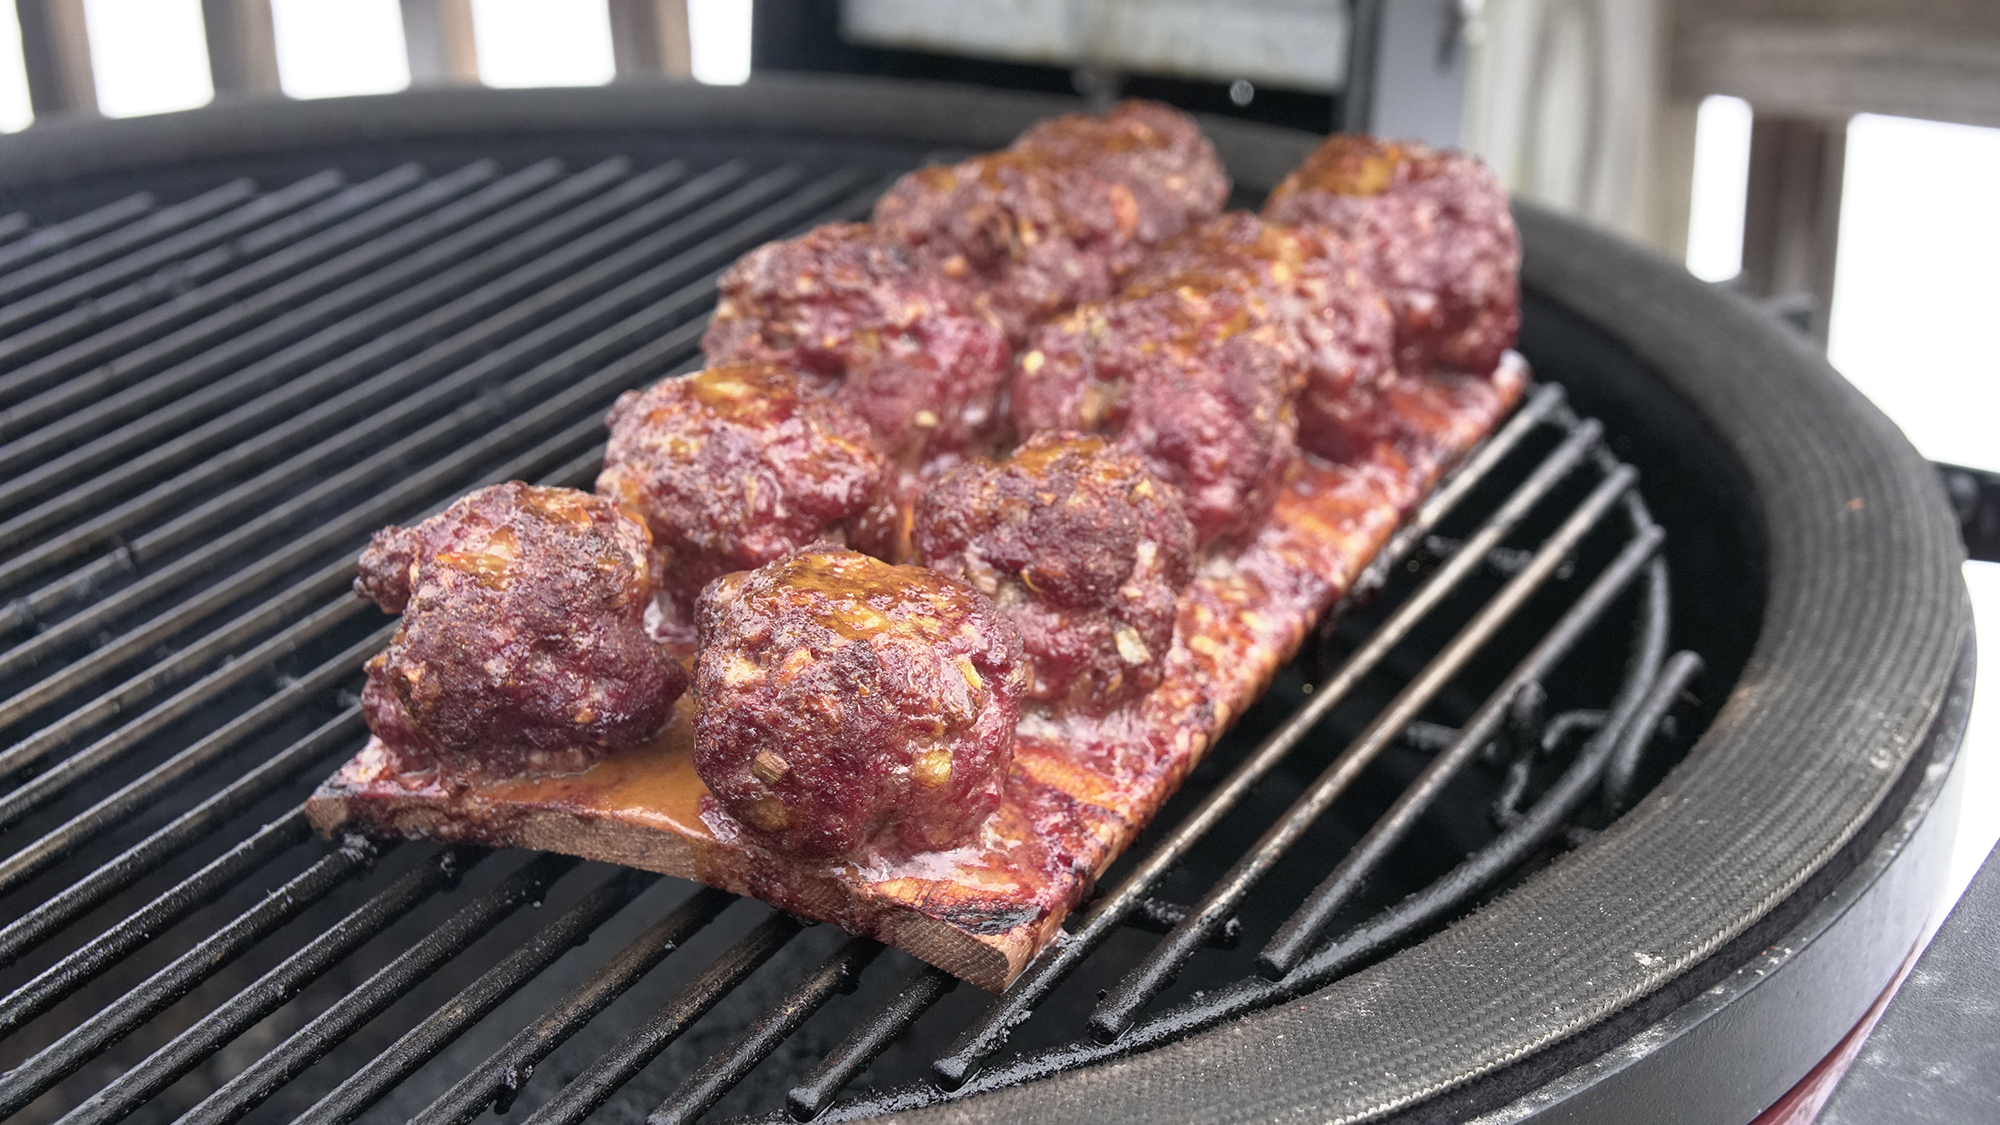 Hickory Planked Meatballs